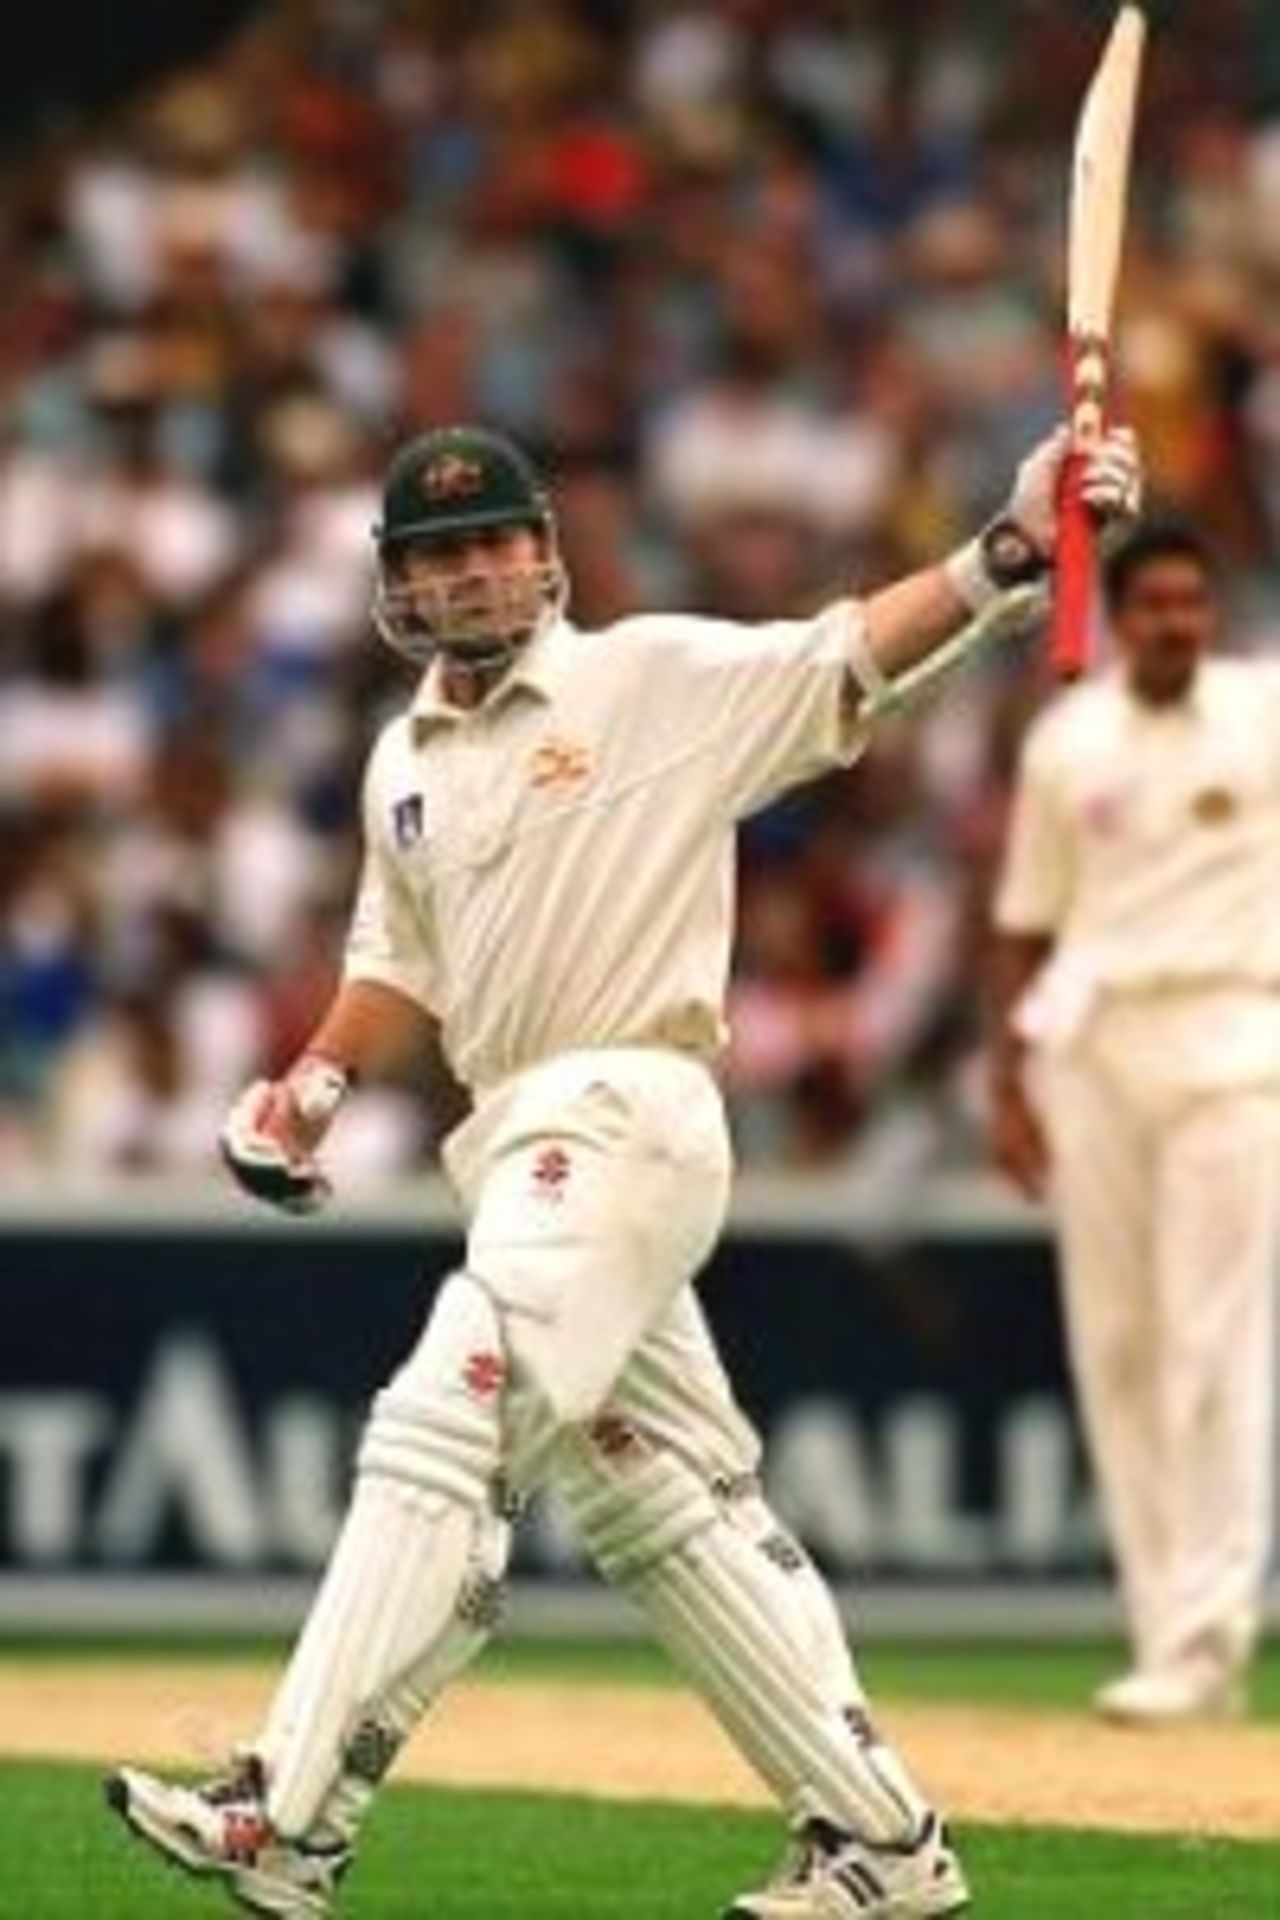 Dec 1999: Australian cricket team batsman Michael Slater salutes the crowd after reaching fifty runs during the Boxing Day Cricket Test match between Australia and India at the Melbourne Cricket Ground, Melbourne, Australia. Bad light stopped play with Australia on 3 for 138.